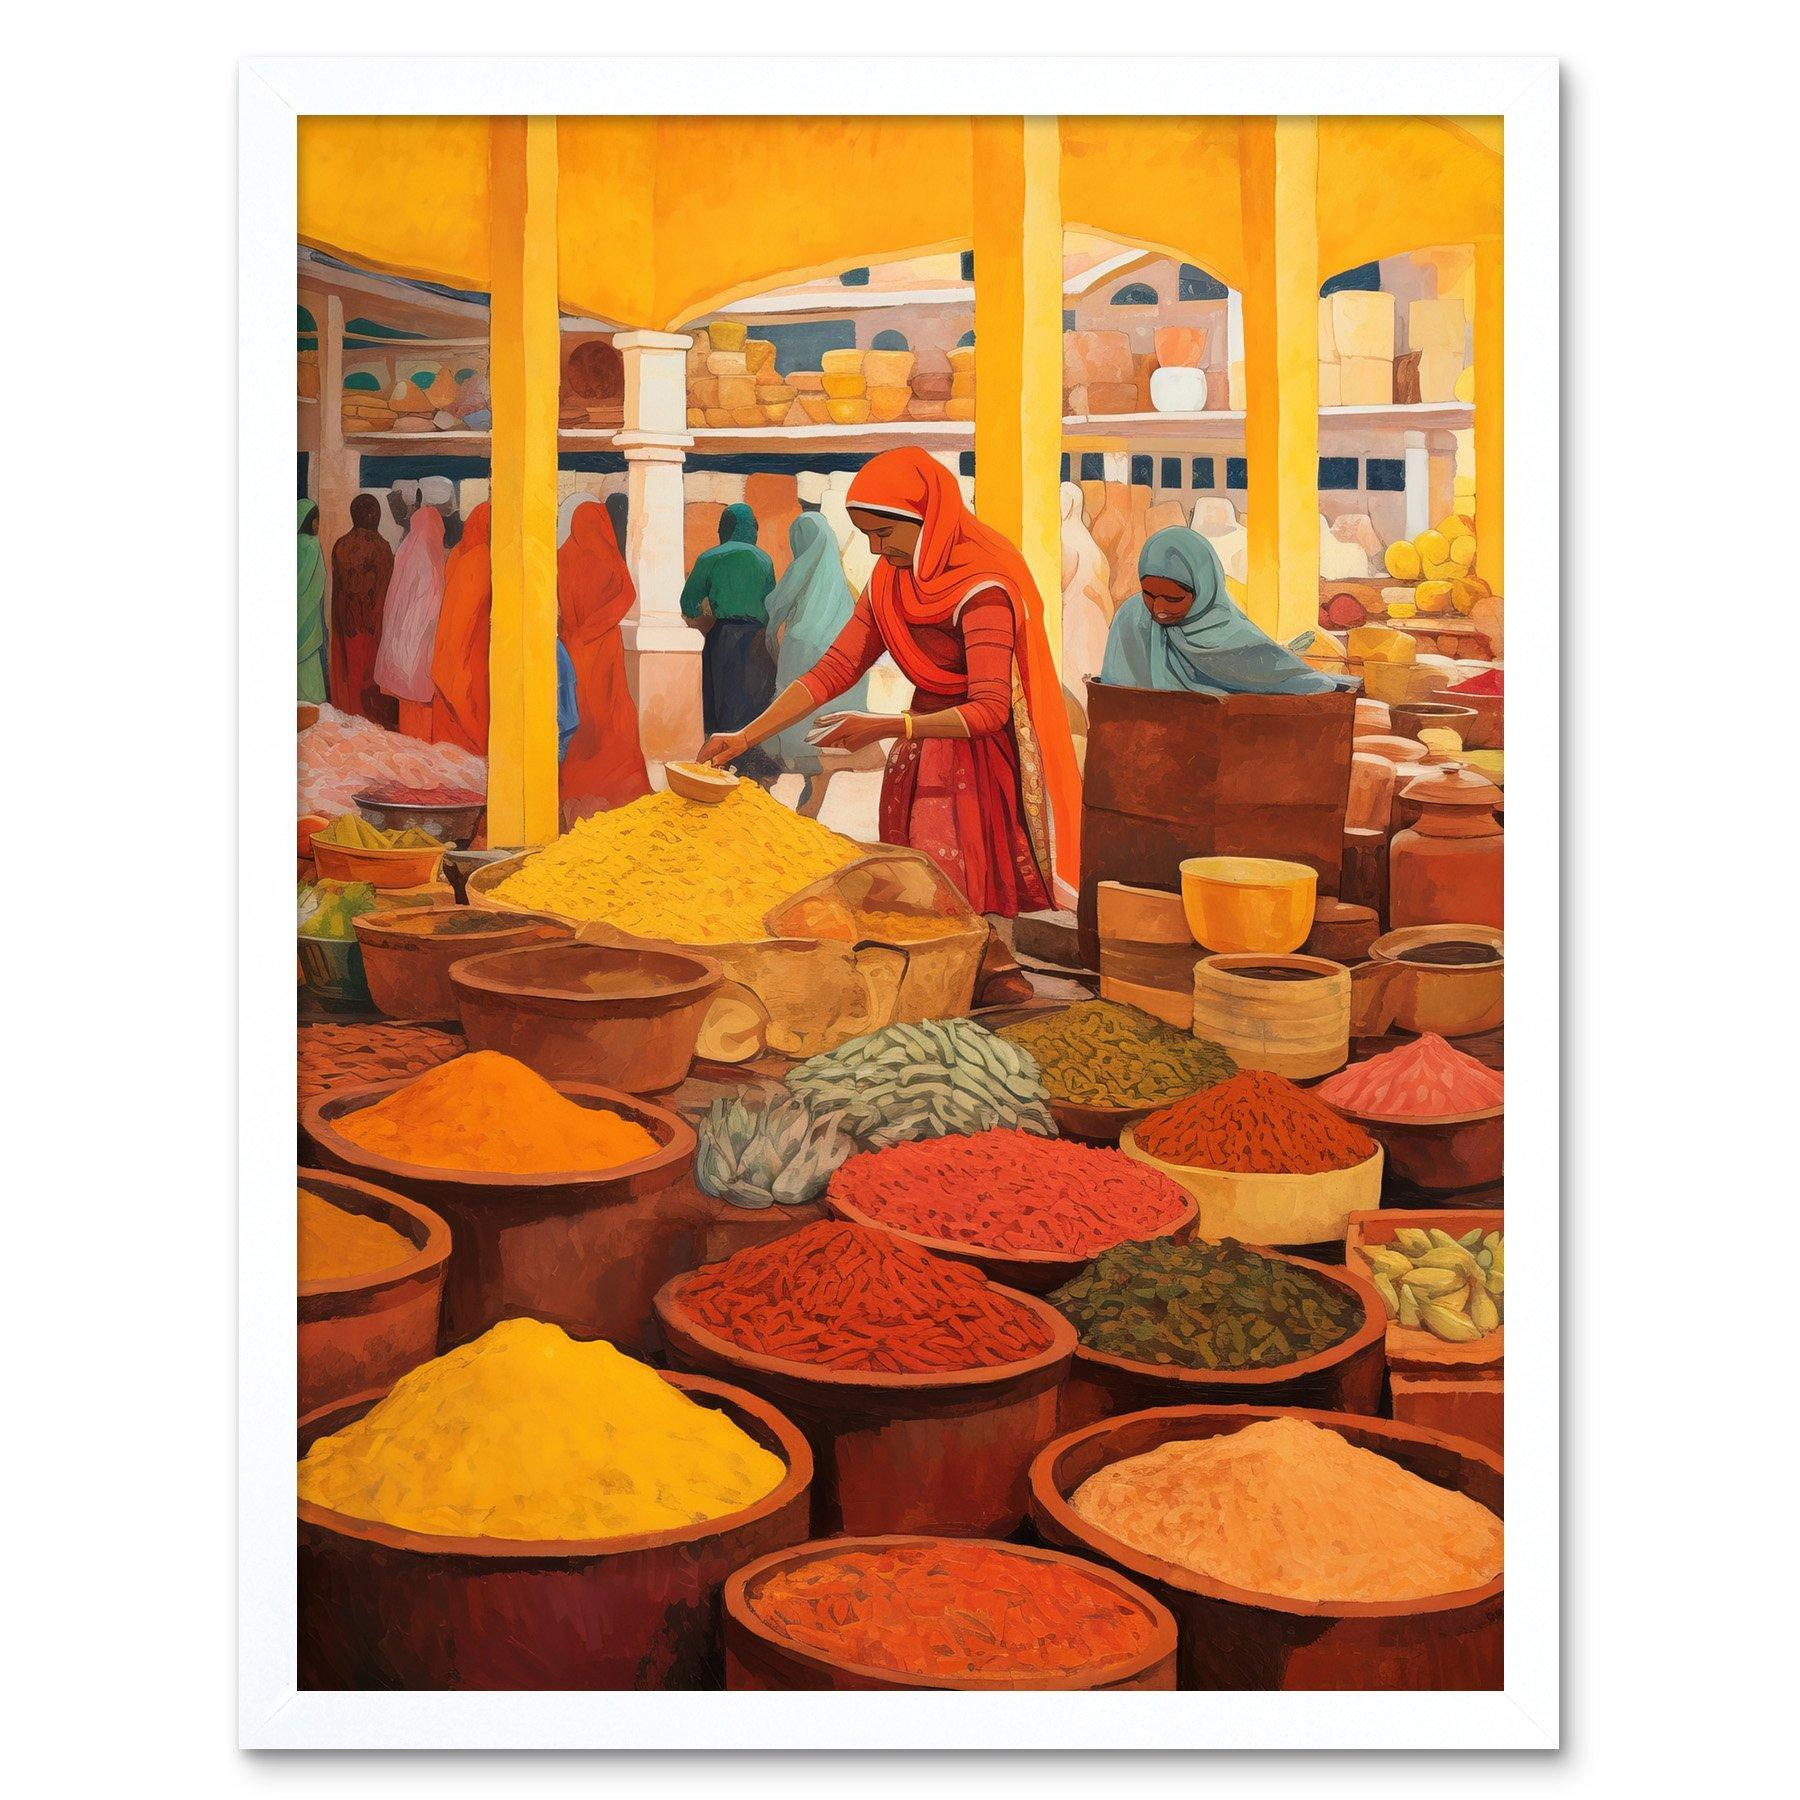 The Spice Market Asian Herbs and Spices Colourful Kitchen Artwork Art Print Framed Poster Wall Decor 12x16 inch - image 1